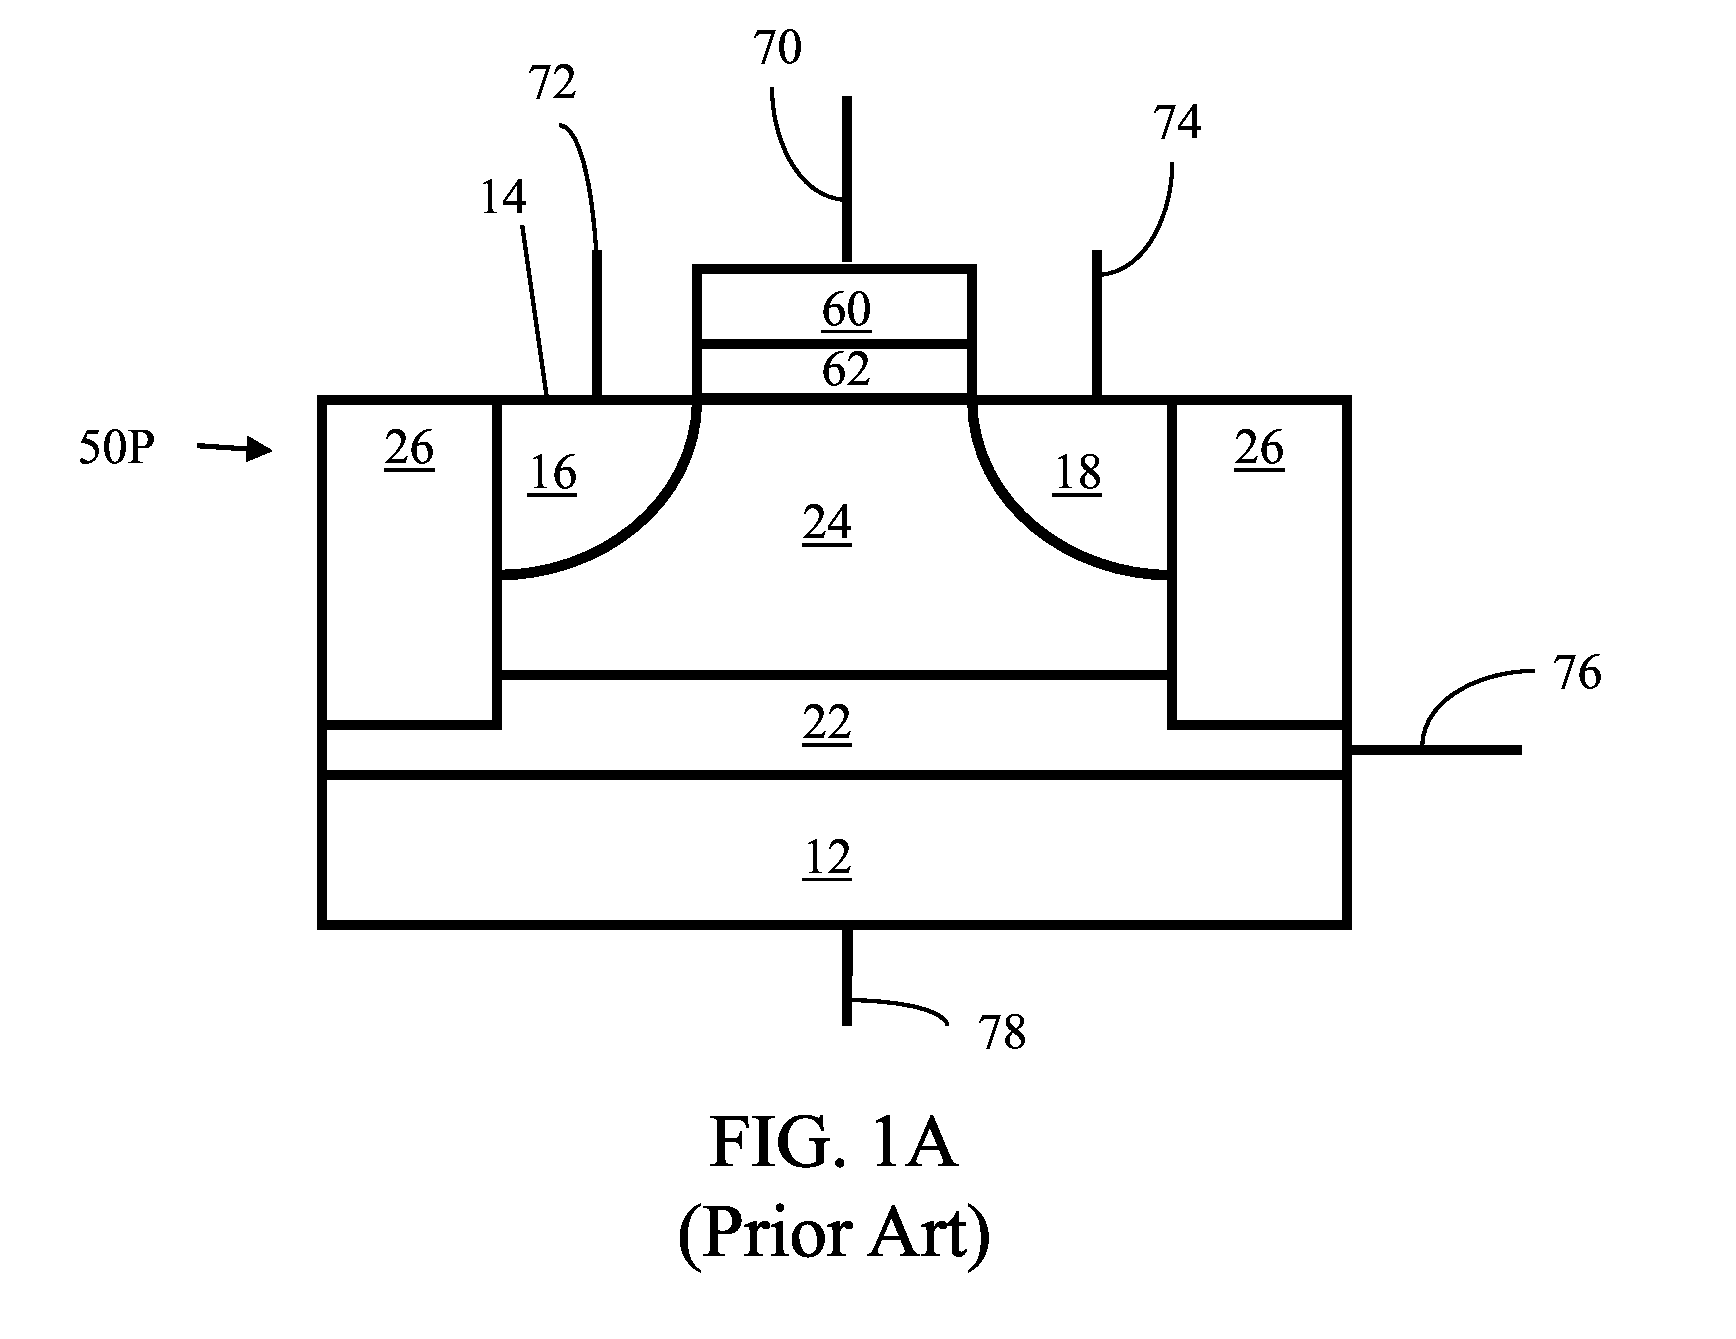 Asymmetric semiconductor memory device having electrically floating body transistor